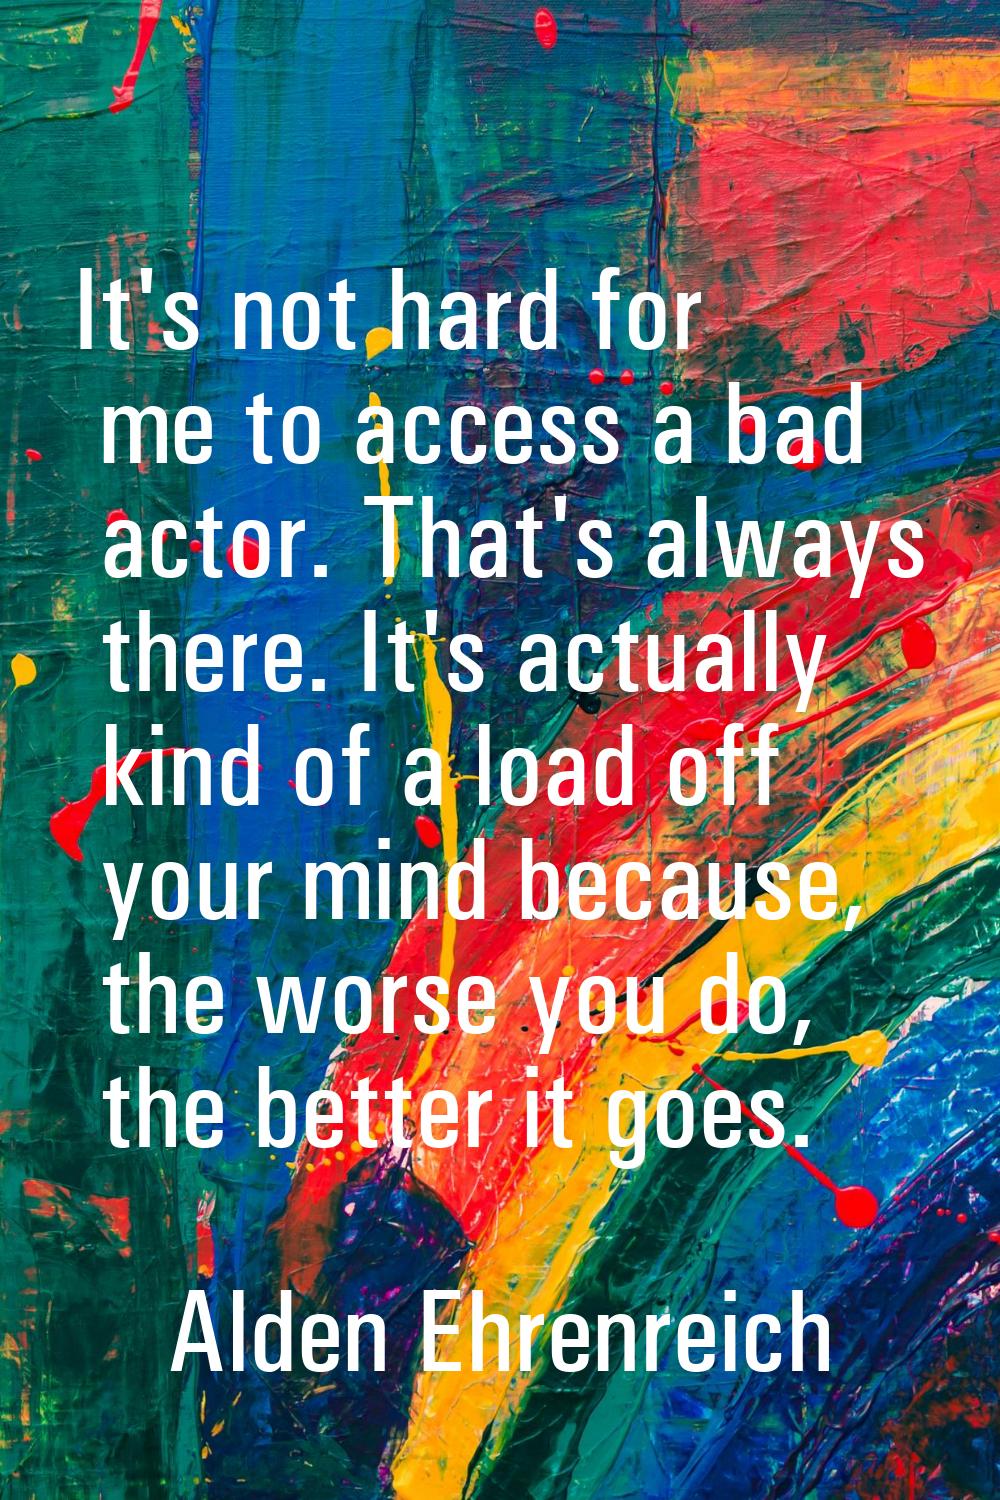 It's not hard for me to access a bad actor. That's always there. It's actually kind of a load off y